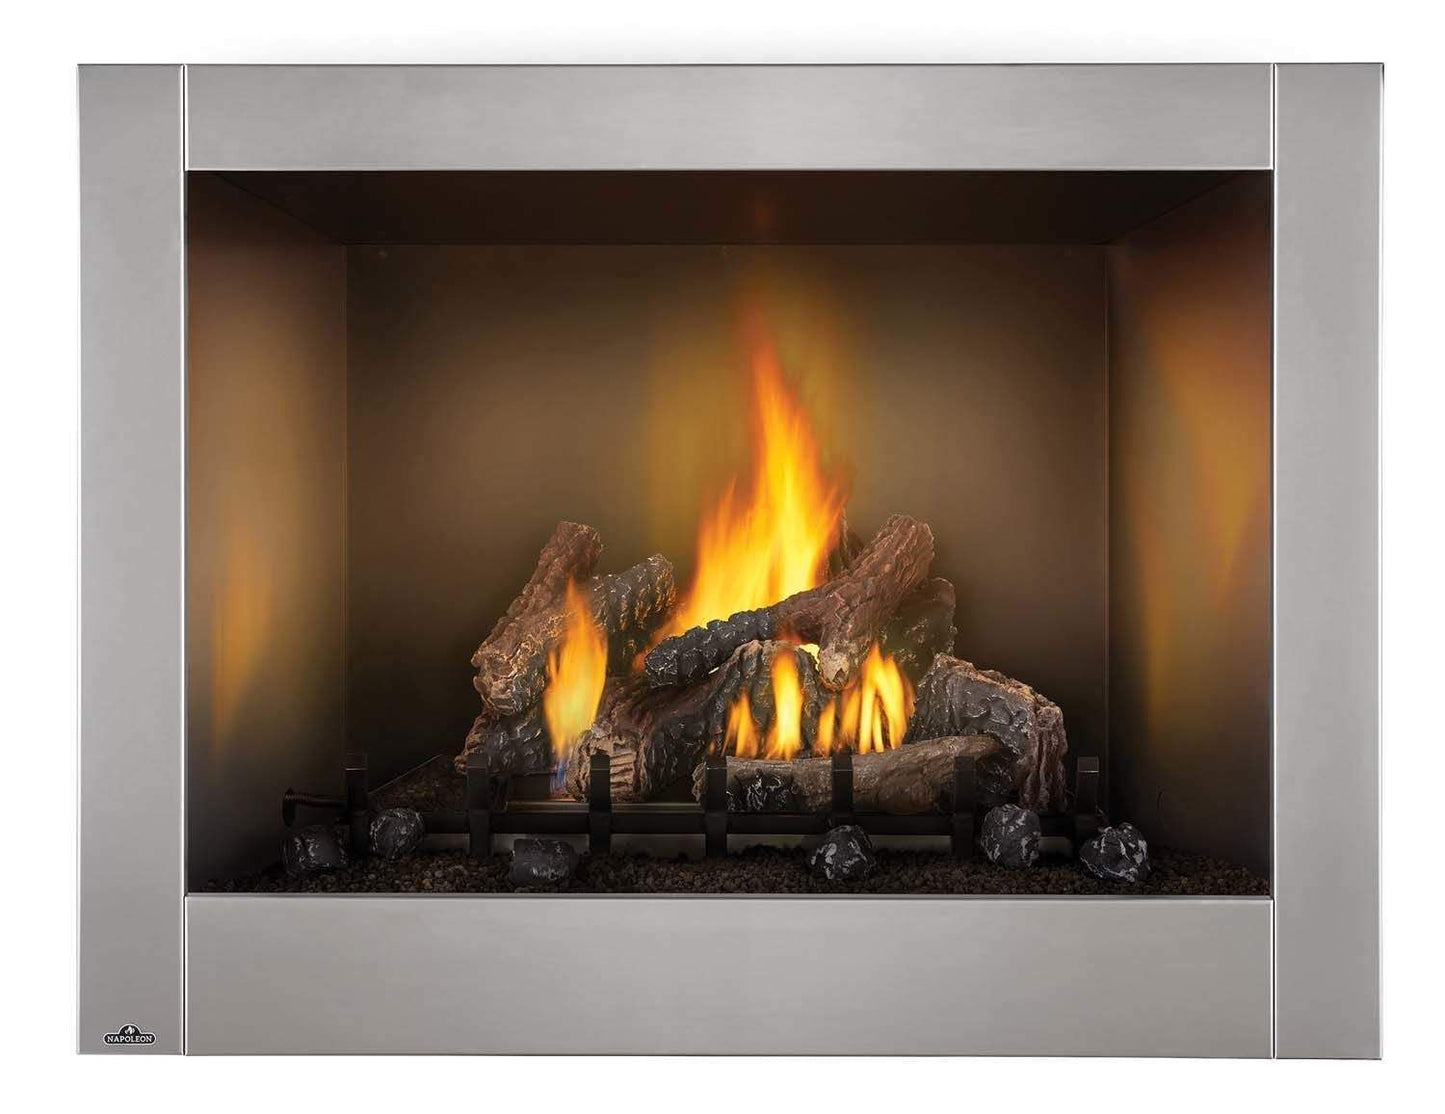 Napoleon Riverside Clean Face 47-Inch Outdoor Built-In Natural Gas Fireplace W/ Millivolt Ignition And Brushed Stainless Steel Face - GSS42CFN